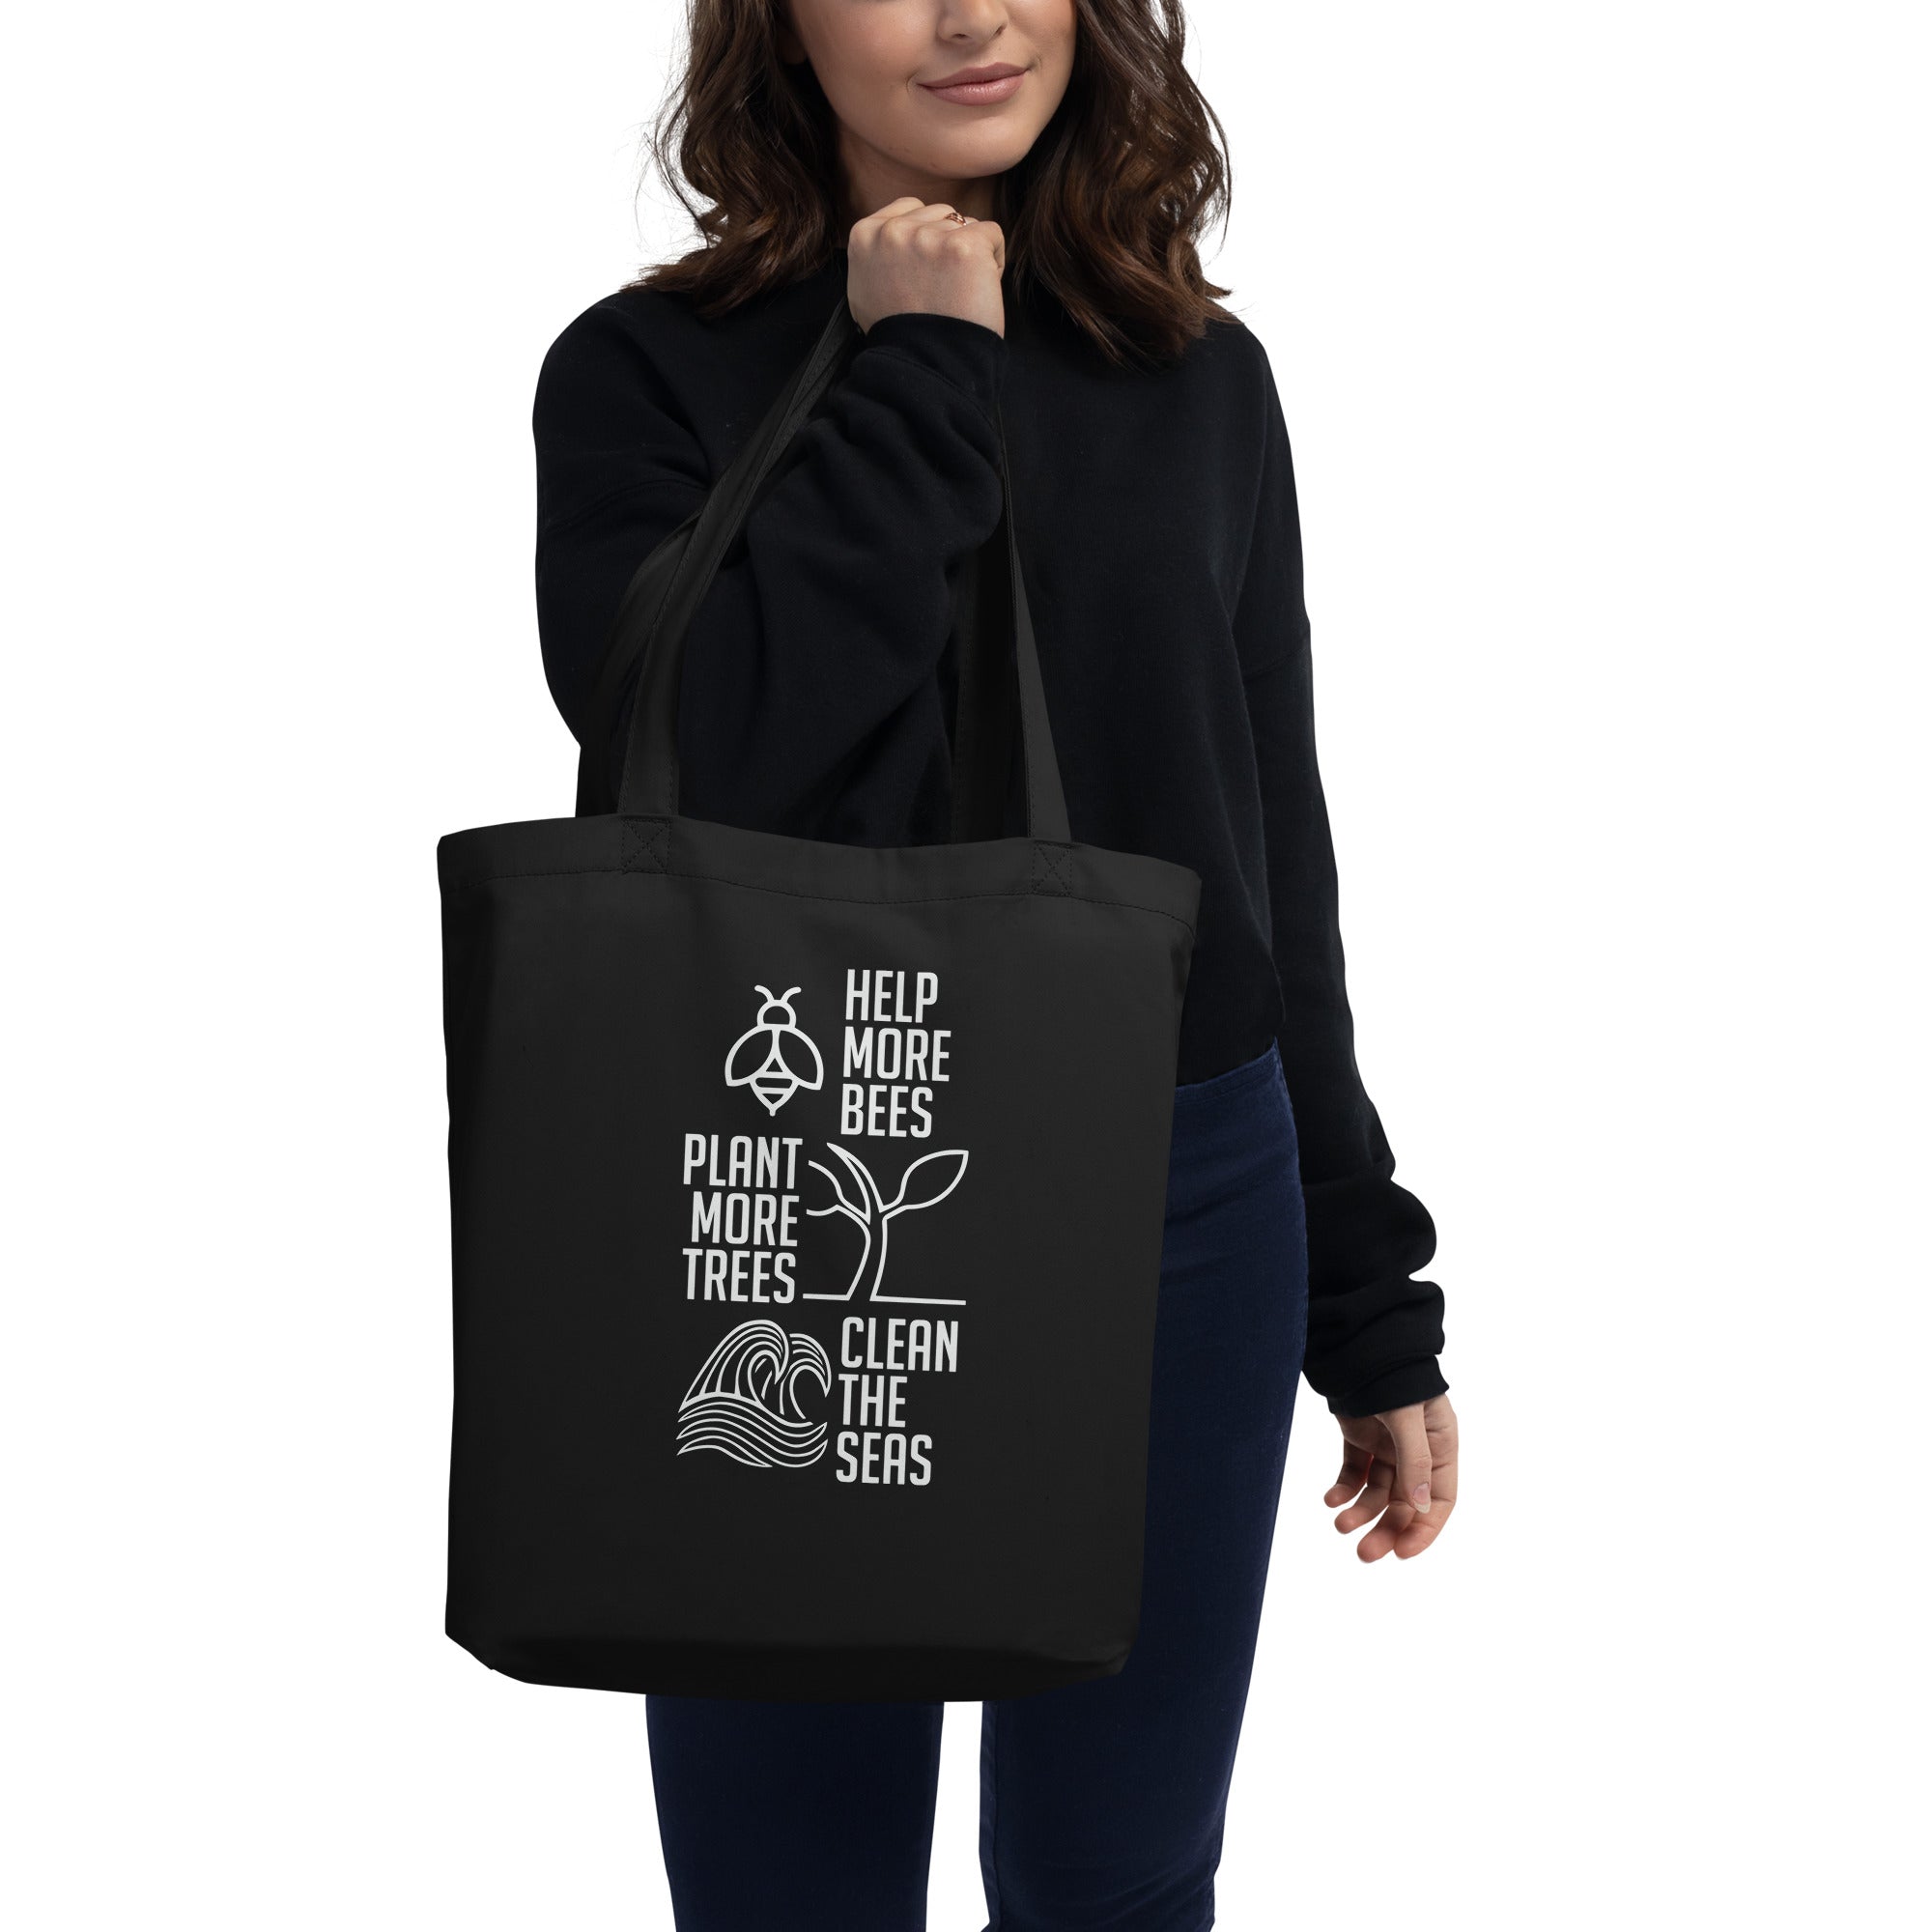 Bees Trees Seas Collection - Help More Bees, Plant More Trees, Clean The Seas - Eco Tote Bag